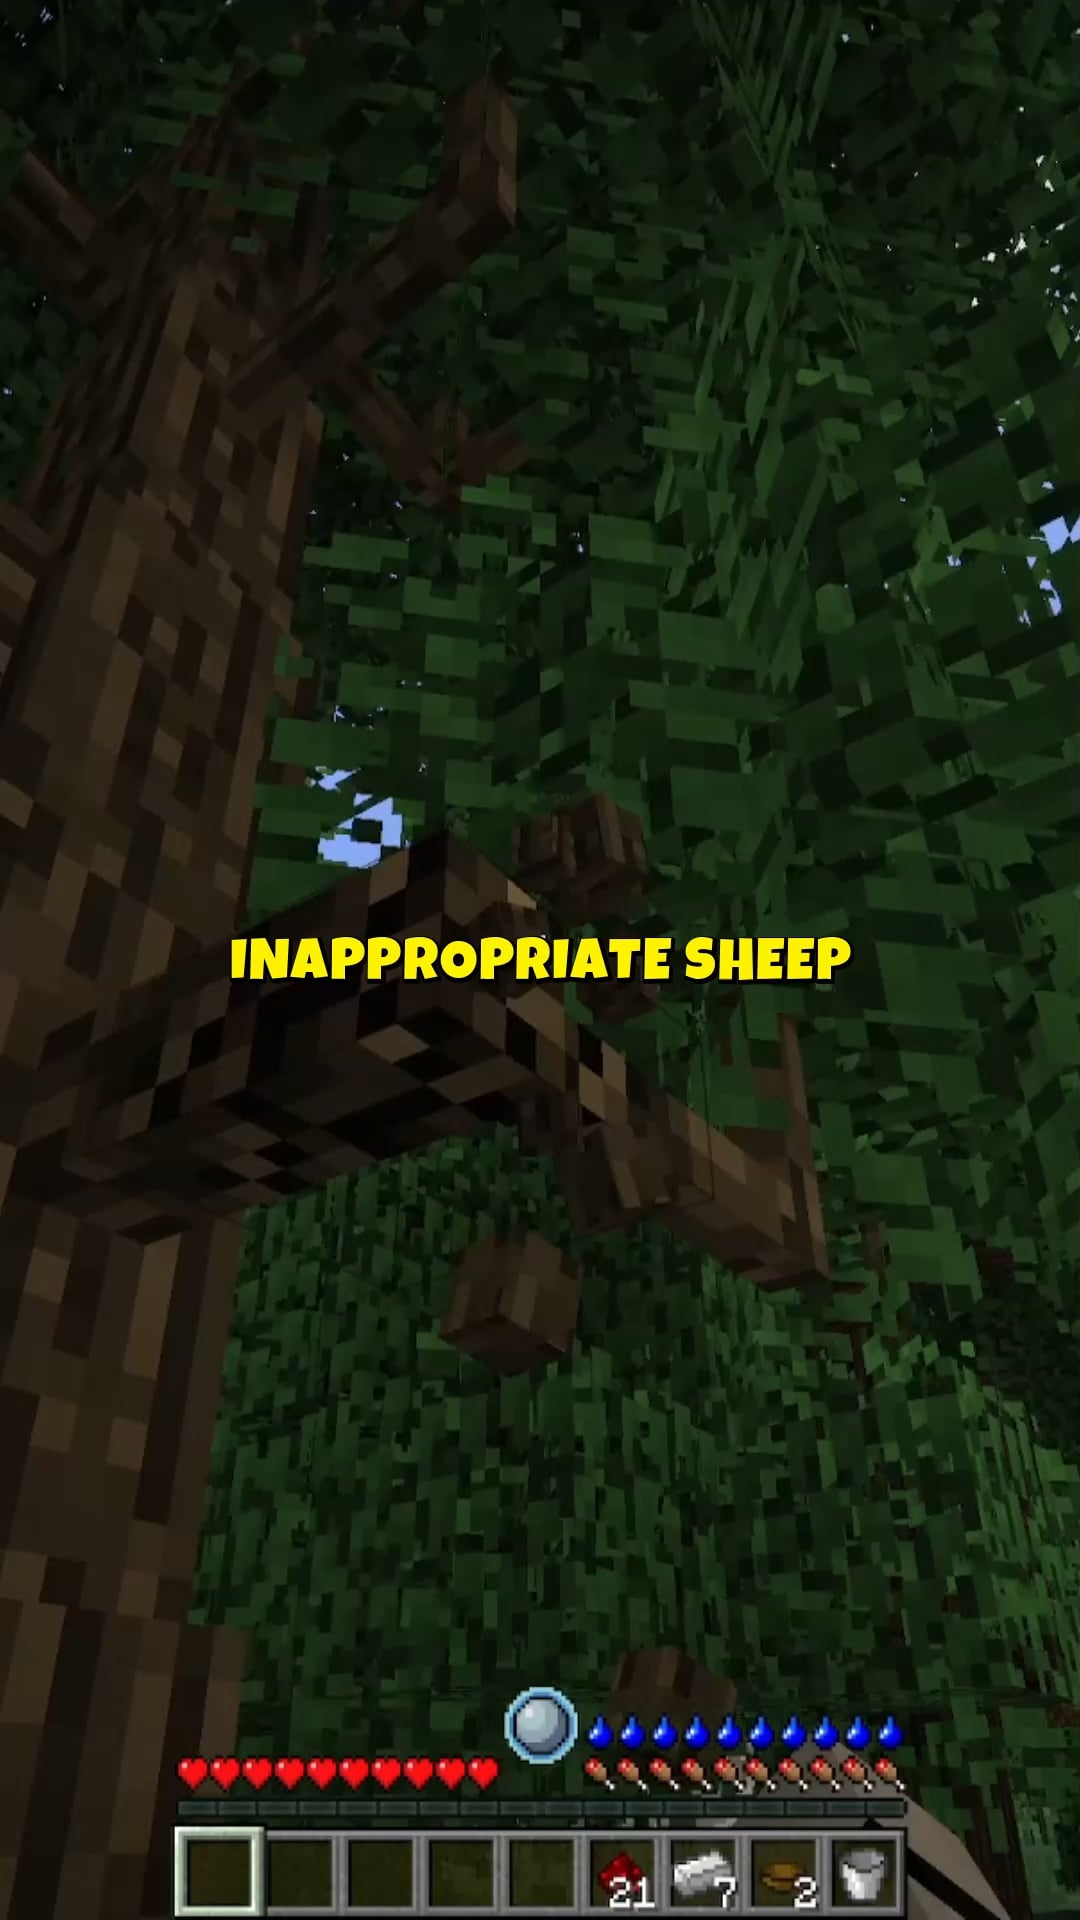 Minecraft Memes - Minecraft Memes: PG-13 Approved?